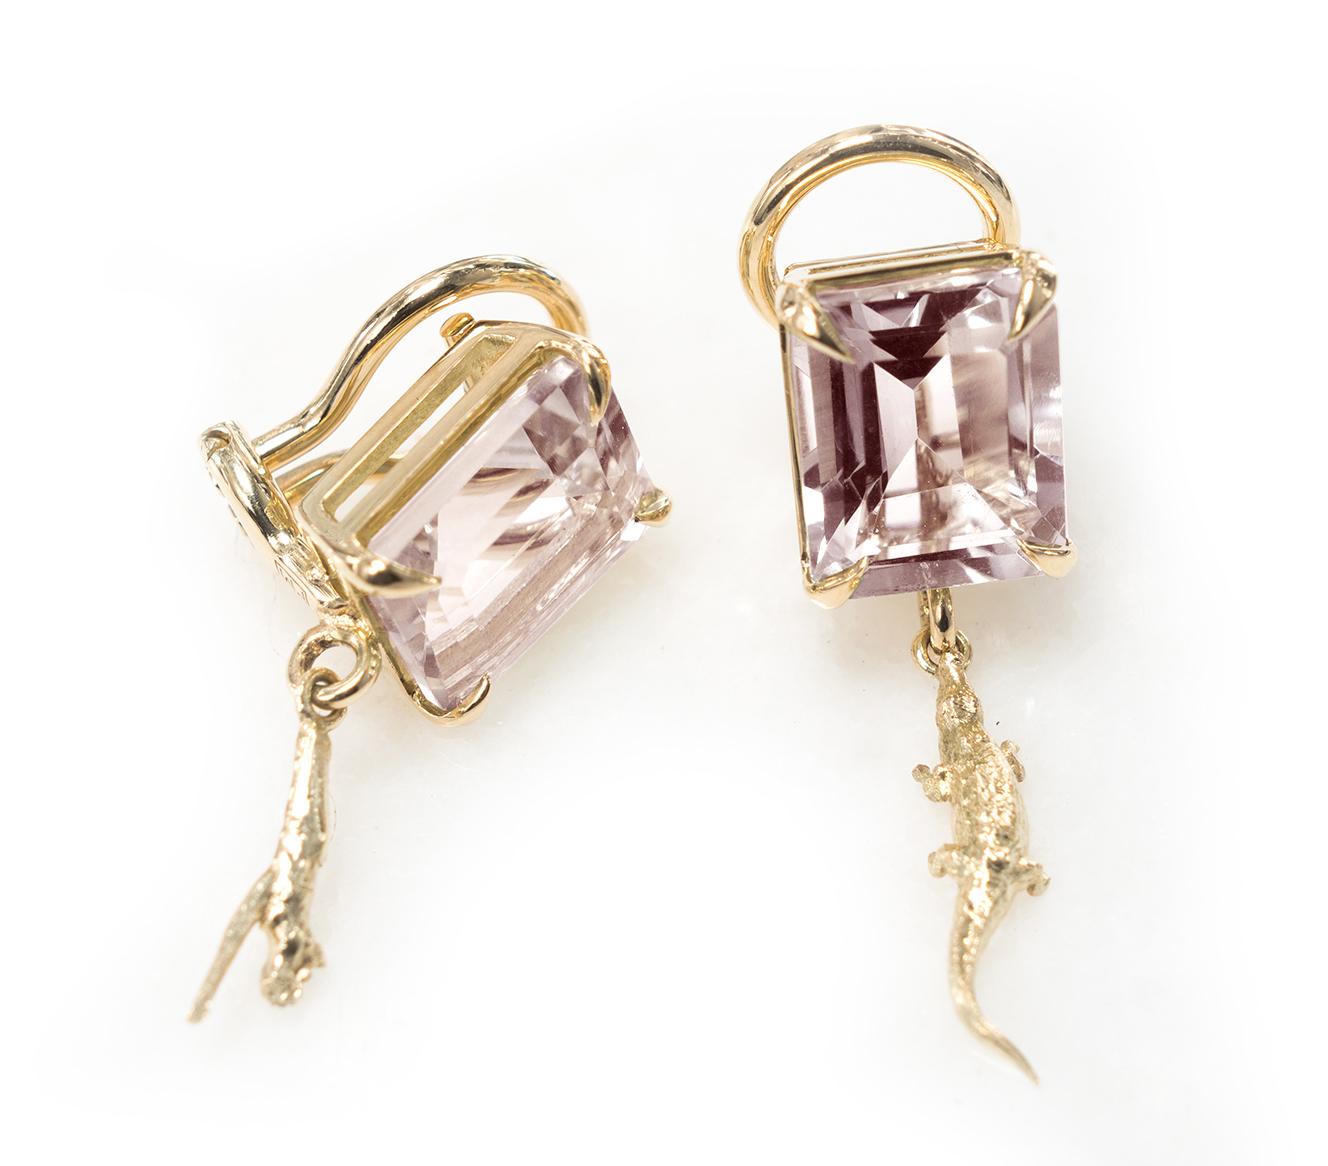 These contemporary Mesopotamia dangle earrings with light pink morganites (9x7 mm each, octagon cut) belong to Tea collection, which was featured in Vogue UA published issue. These earrings are made of 18 Karat yellow gold and designed by the oil